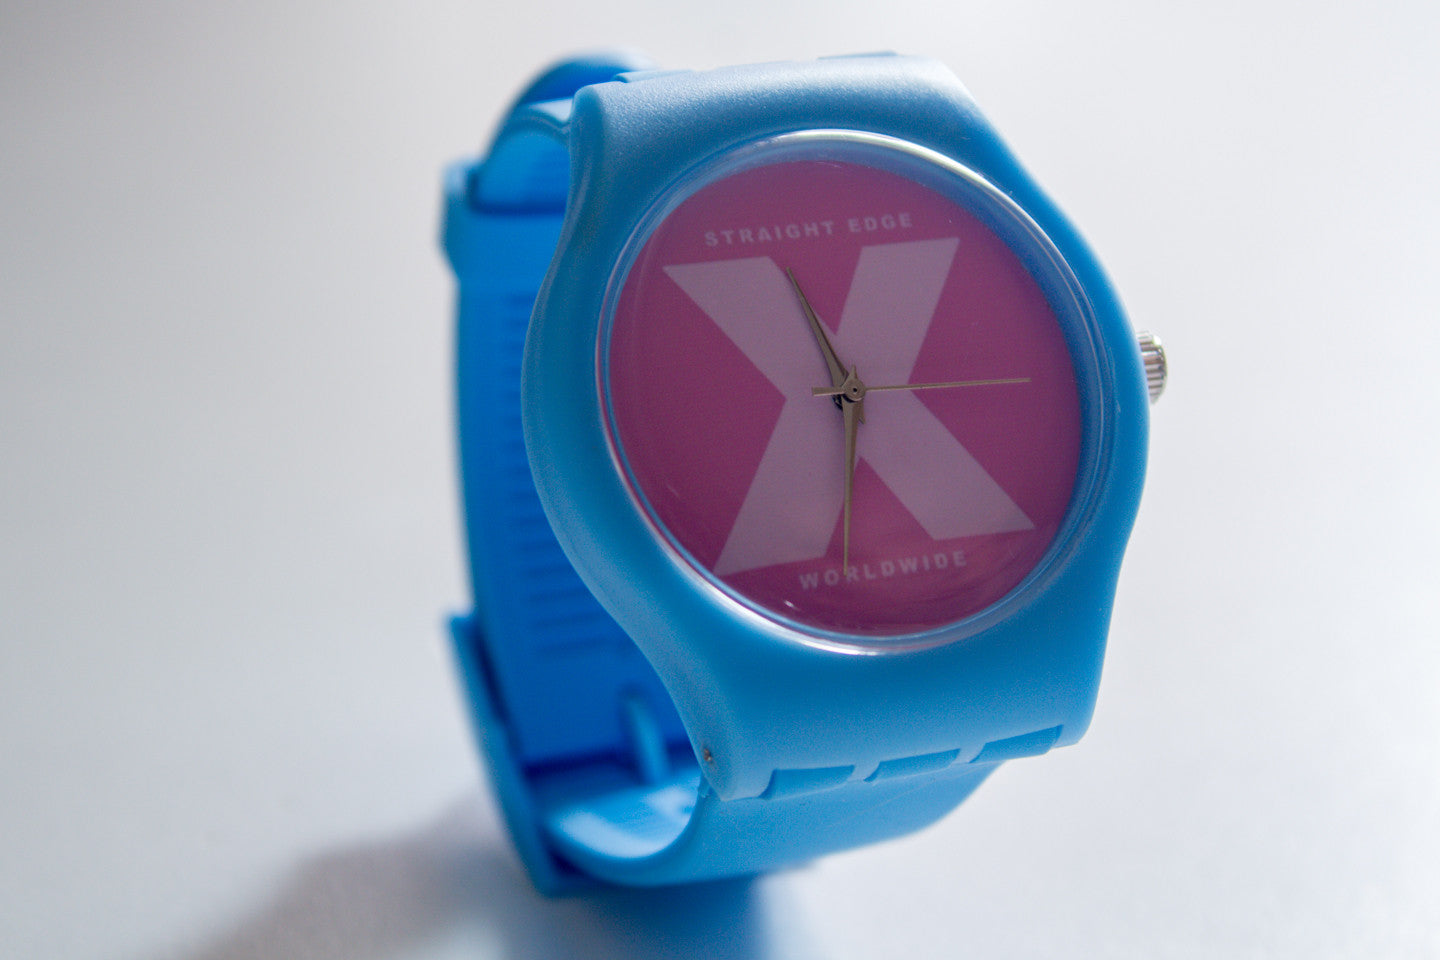 The xWATCHx in Blue